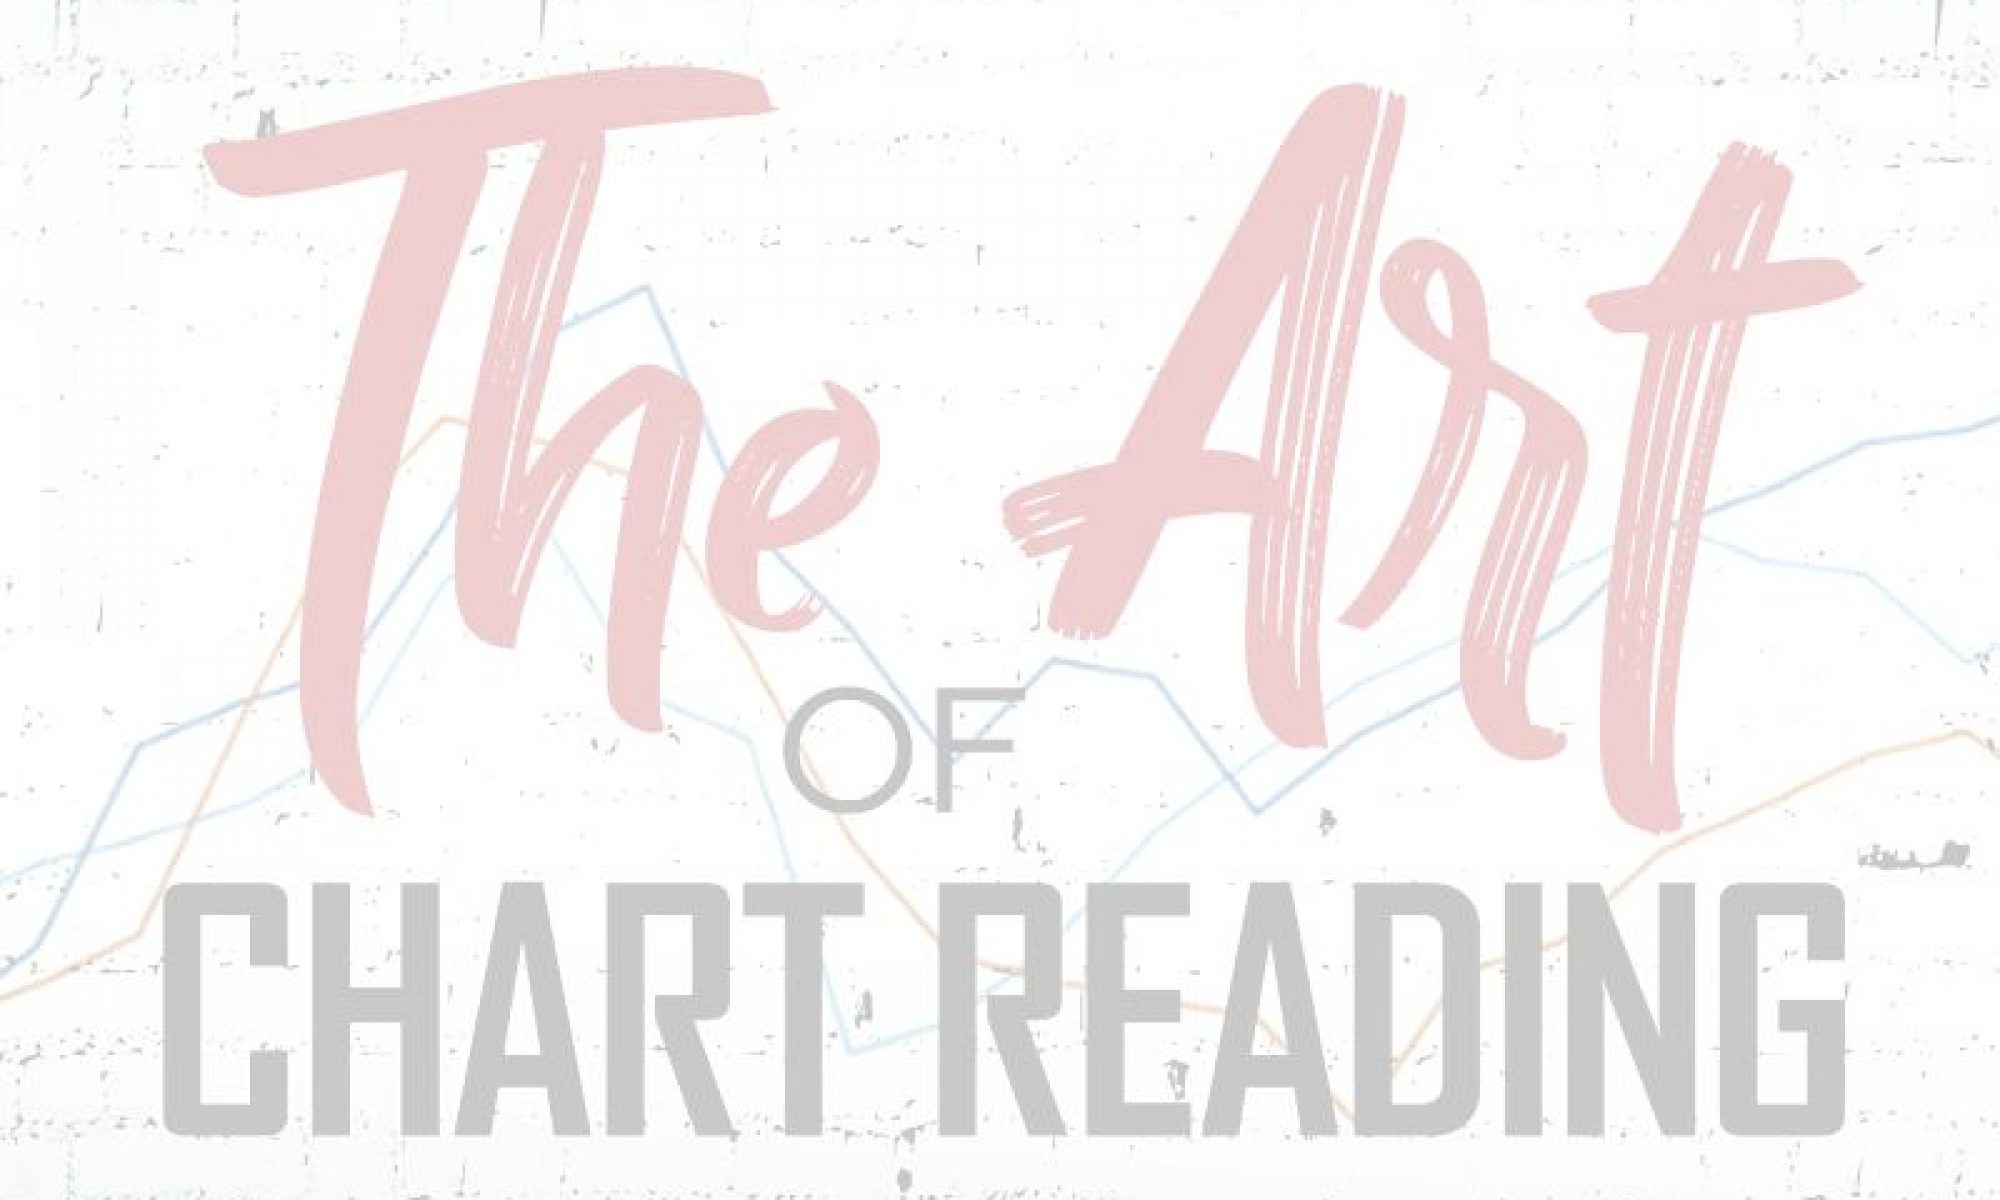 The Art of Chart Reading Online